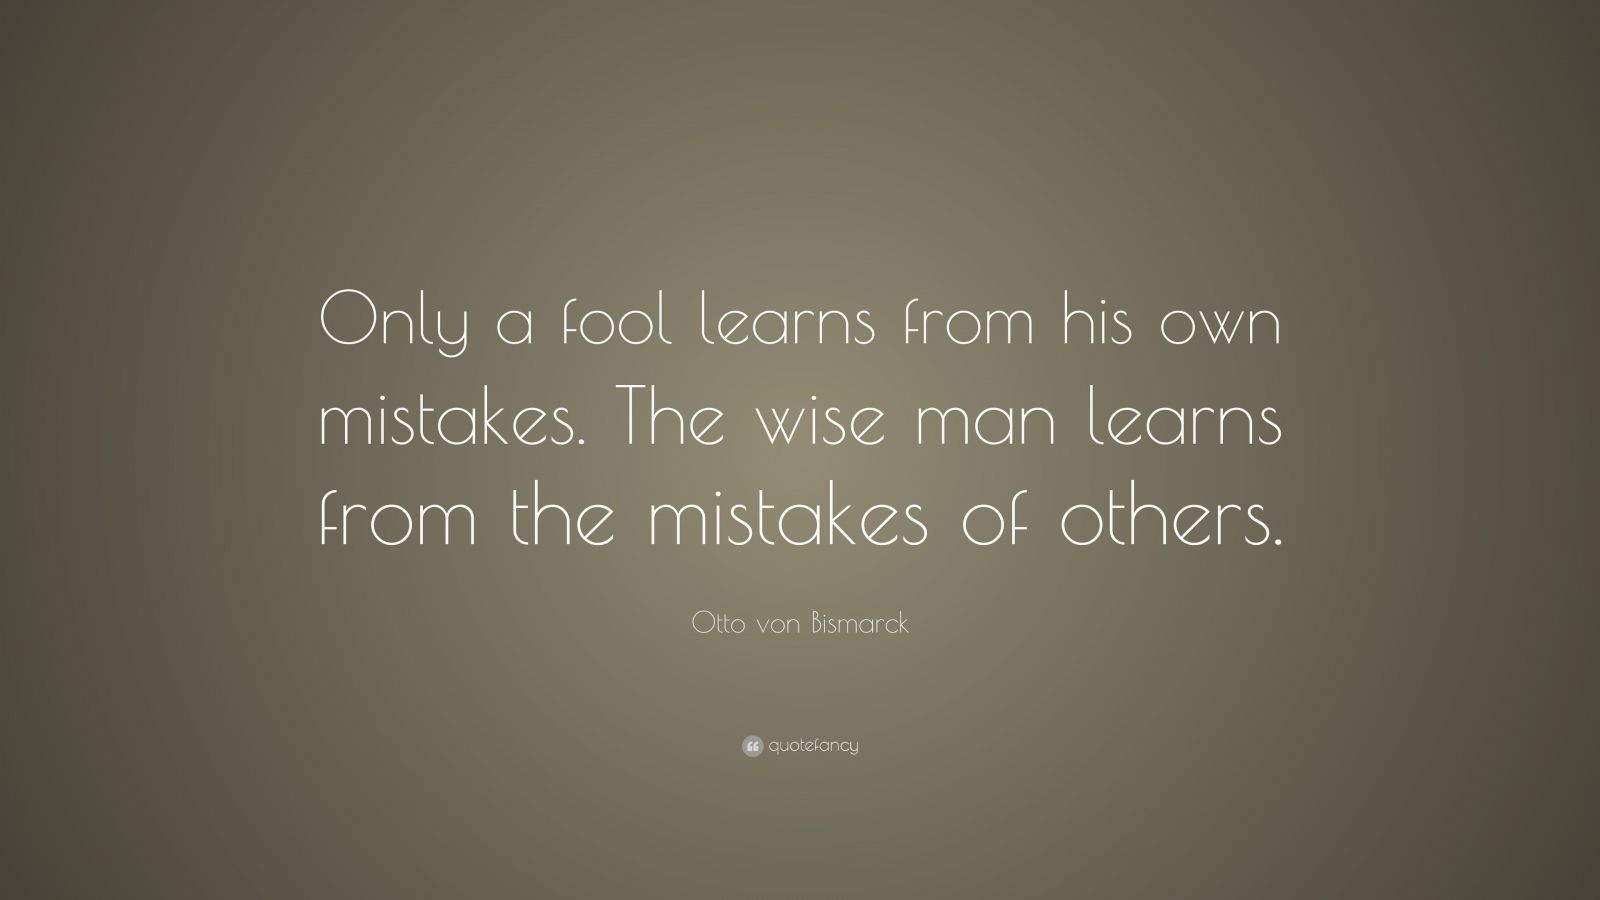 Otto von Bismarck Quote: “Only a fool learns from his own mistakes. The ...